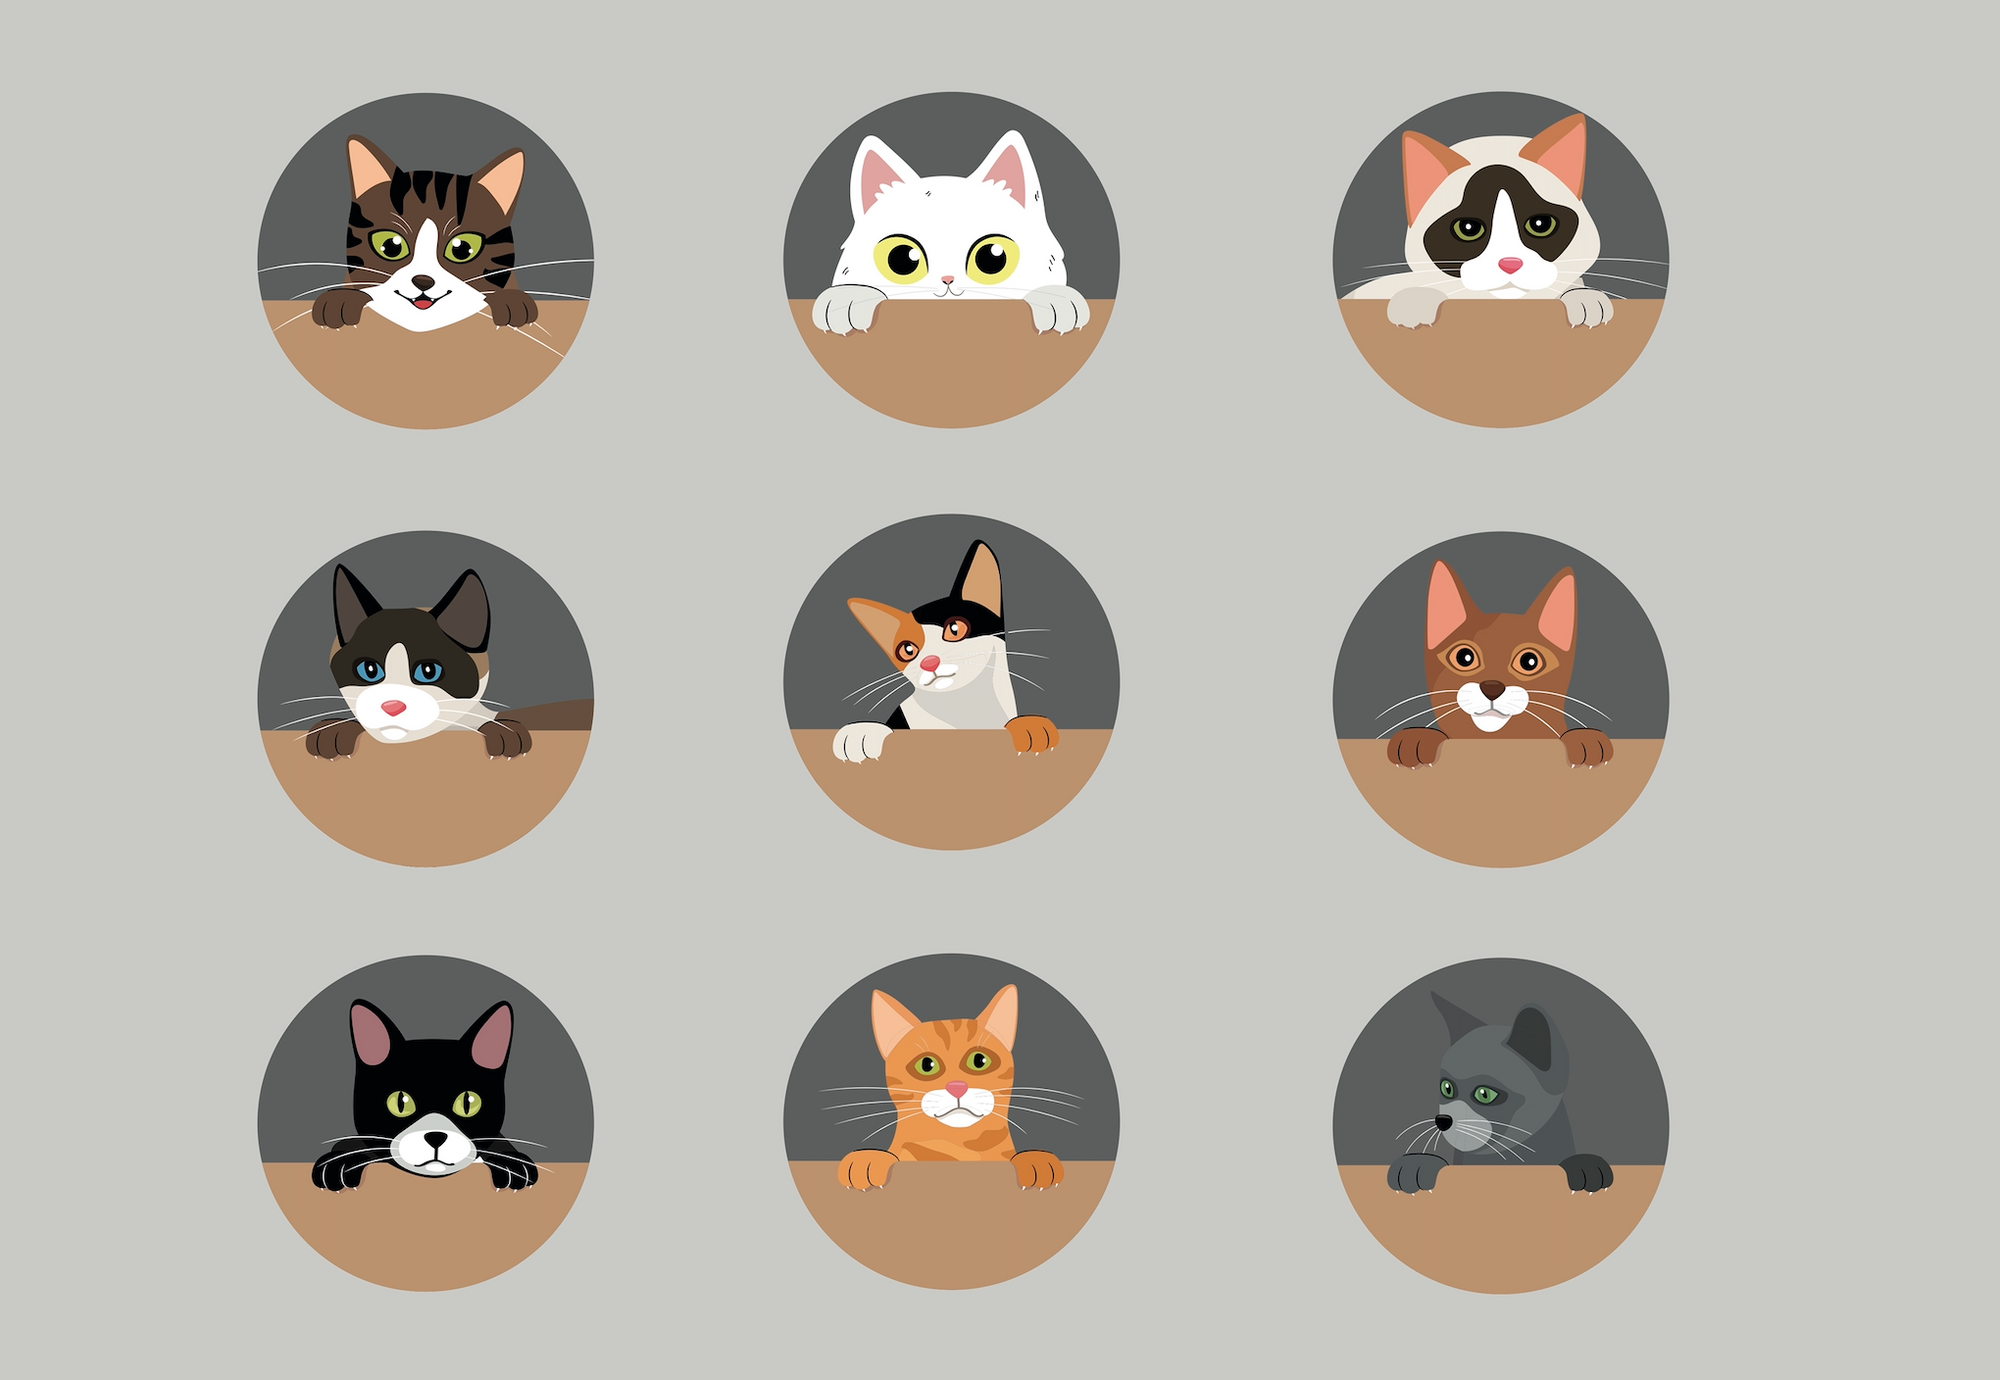 A group of cats in various poses and activities.